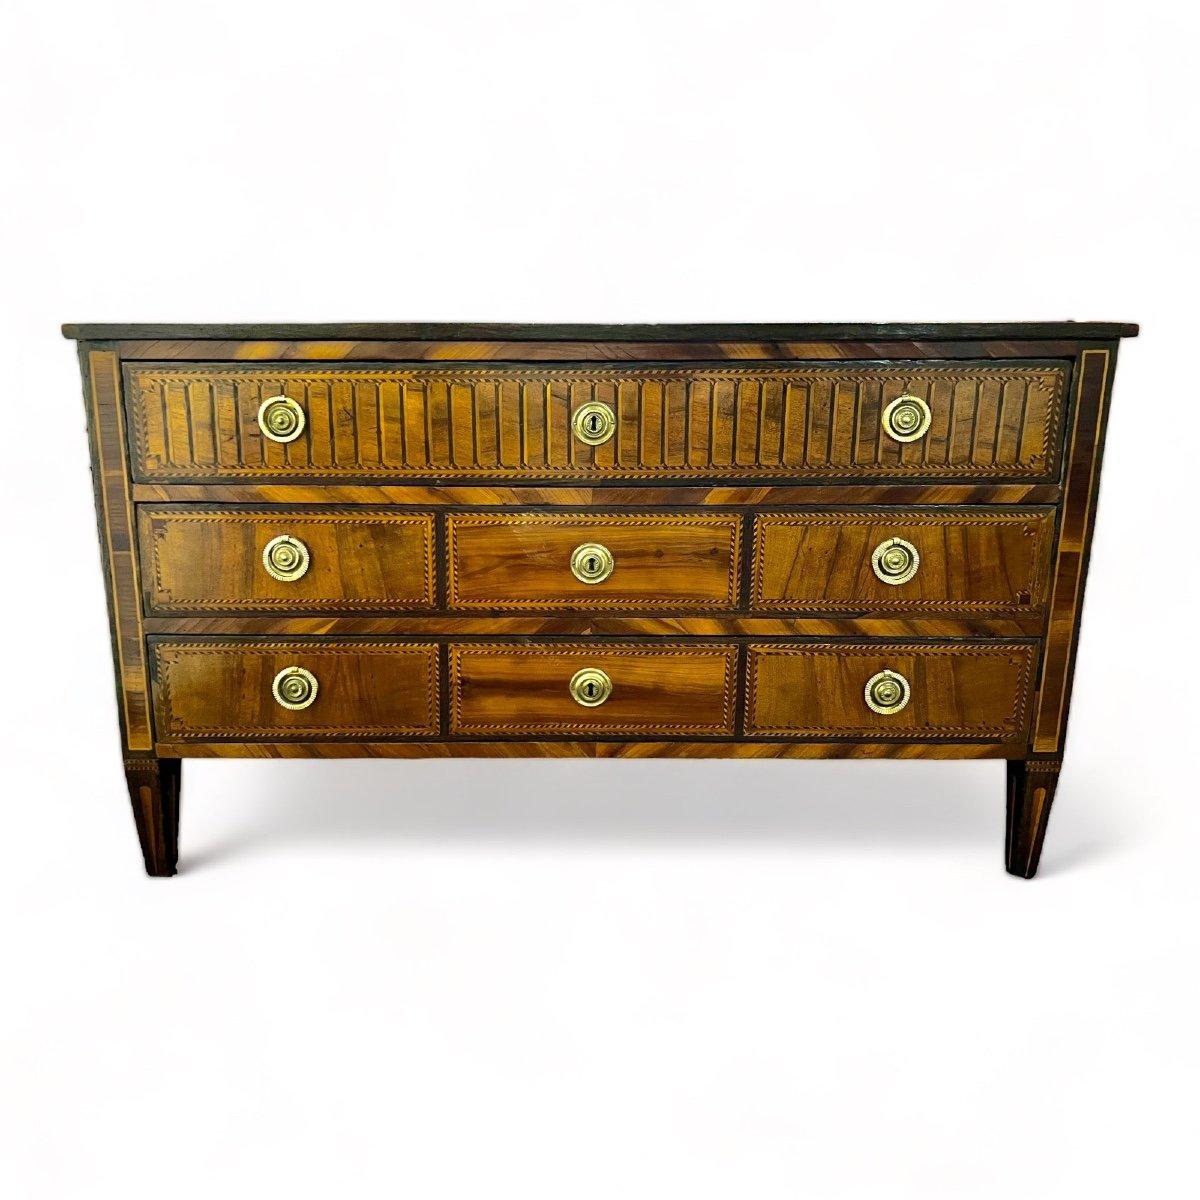 We are delighted to present you with this wonderful Italian chest of drawers originating from the Louis XVI period. Its top displays stunning marquetry that enhances its aesthetic appeal by adding more detailing to its overall design. The piece